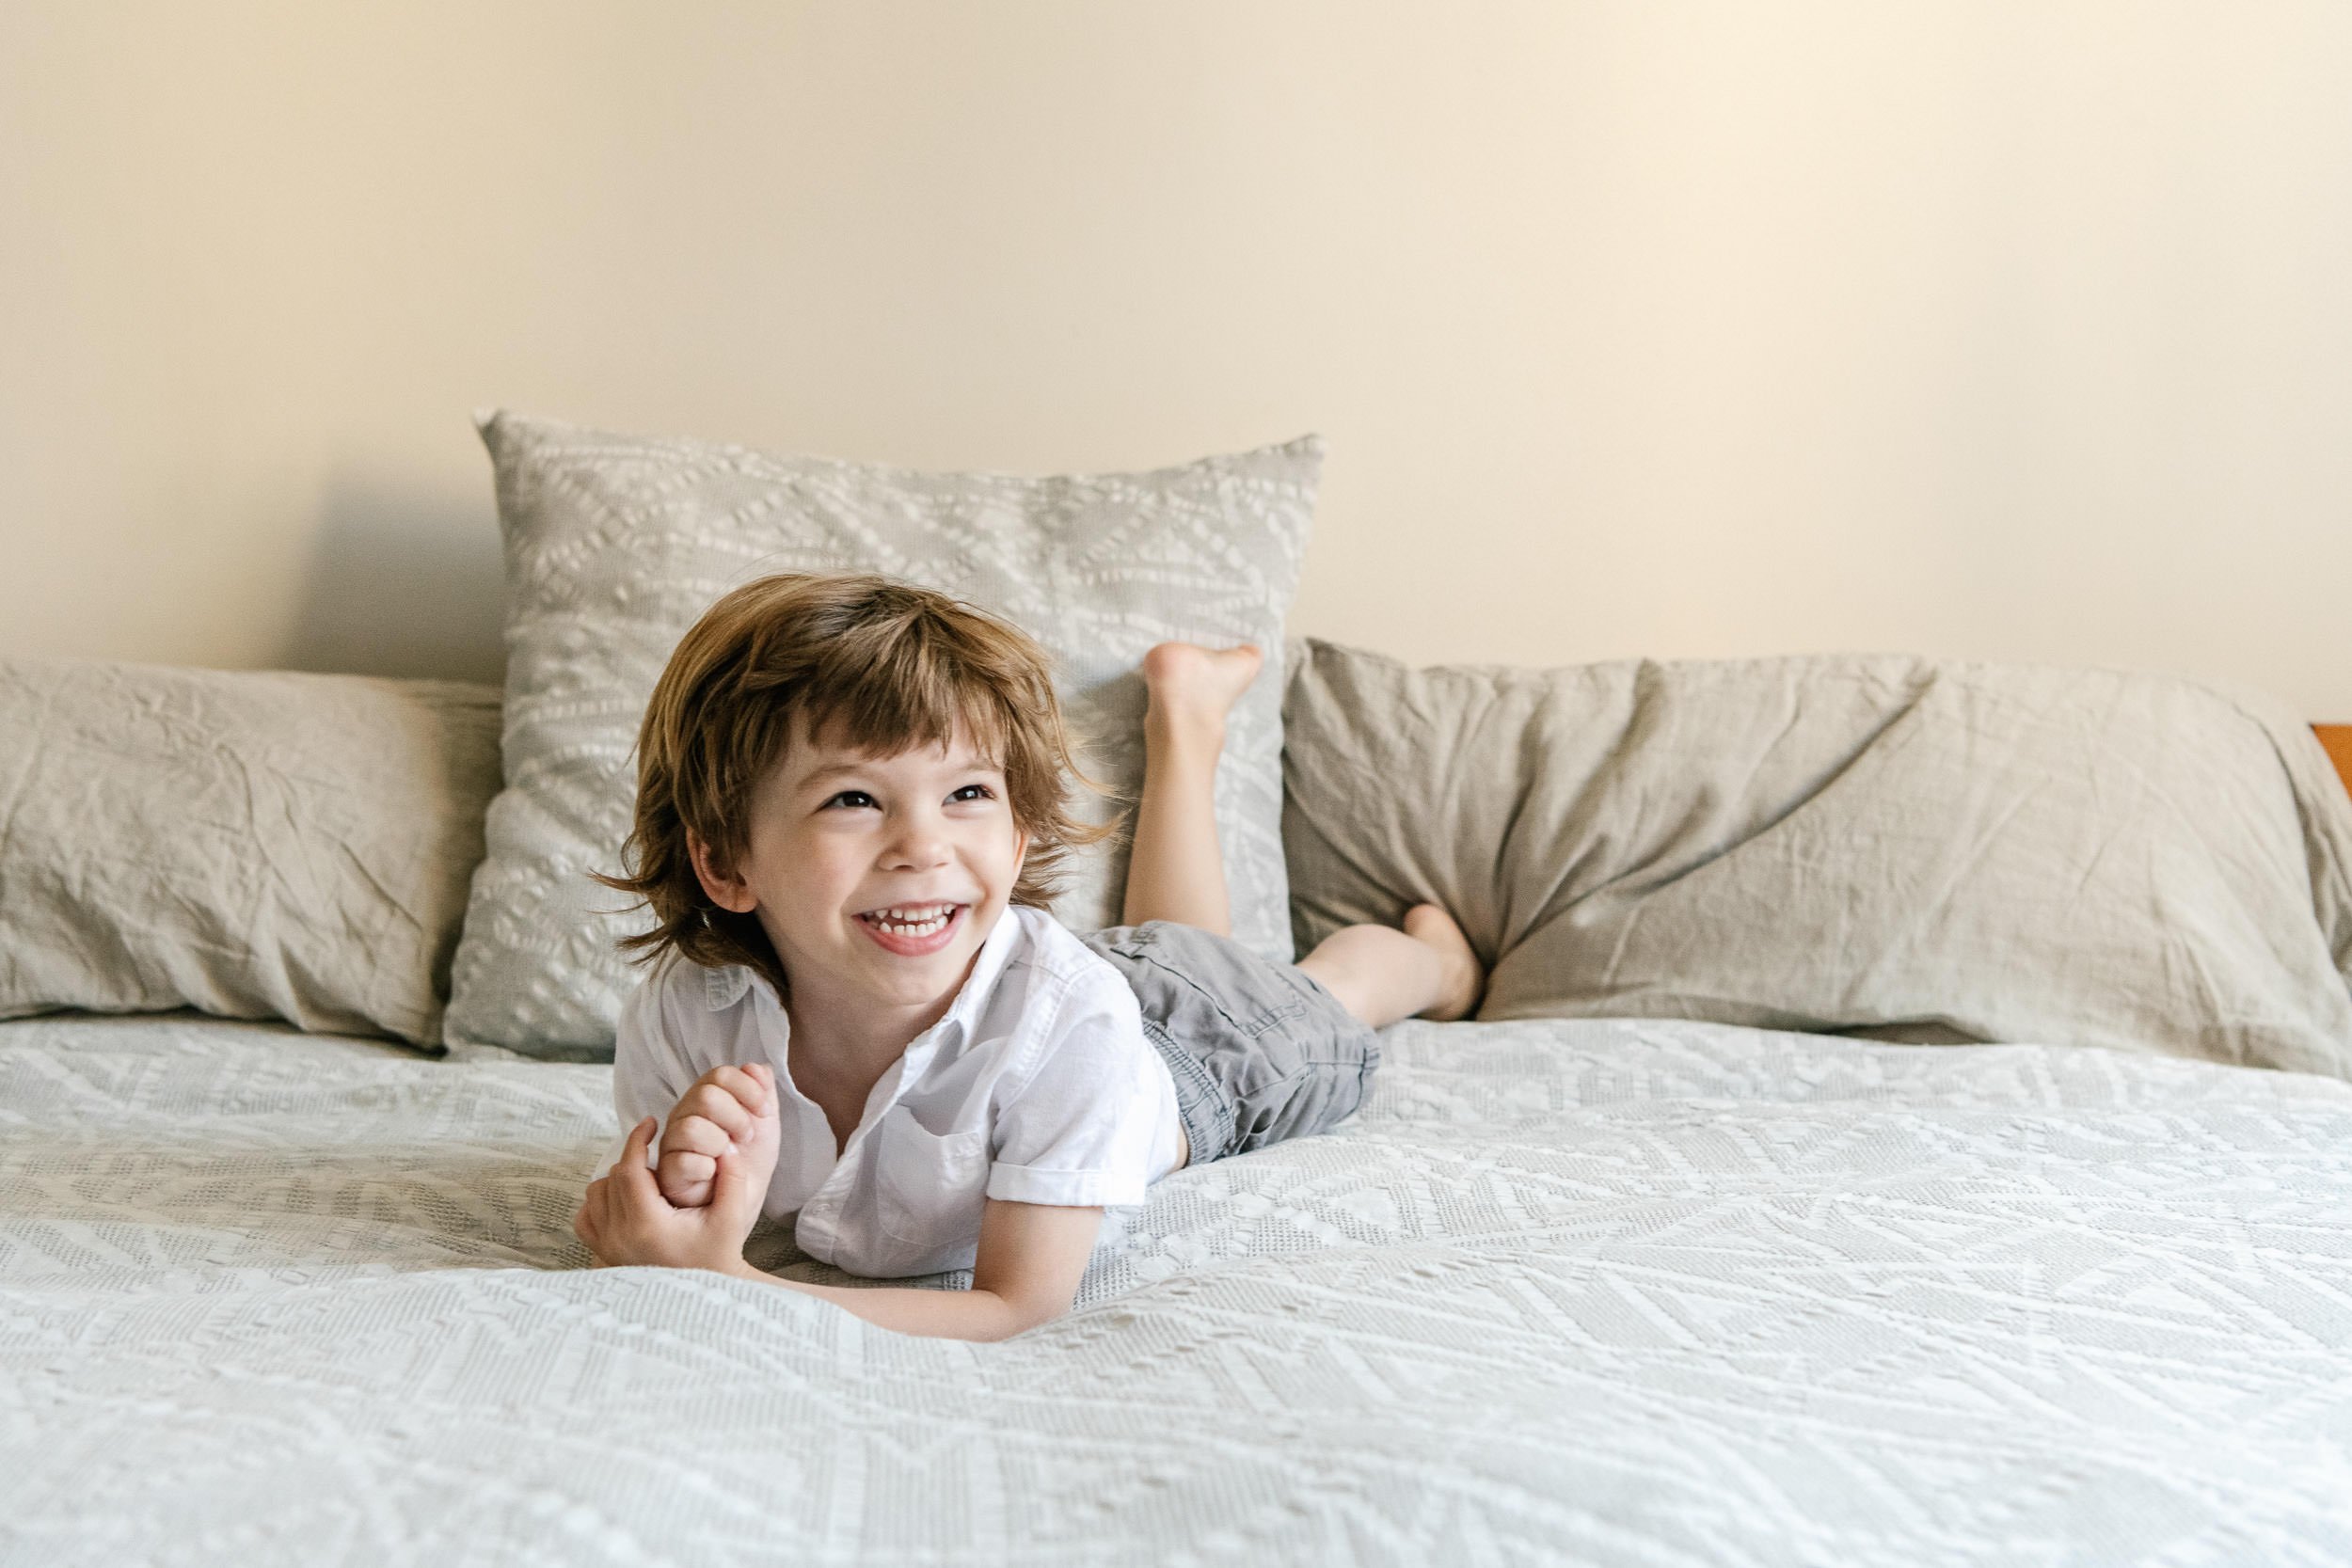  In the New York City area, Nicole Hawkins Photography captures a portrait of a young boy laughing on the bed. family photo #NicoleHawkinsPhotograaphy #NicoleHawkinsChildren #NewYorkPortraits #KidsinNewYork #ChildrensPortraits #lifestyleportraits 